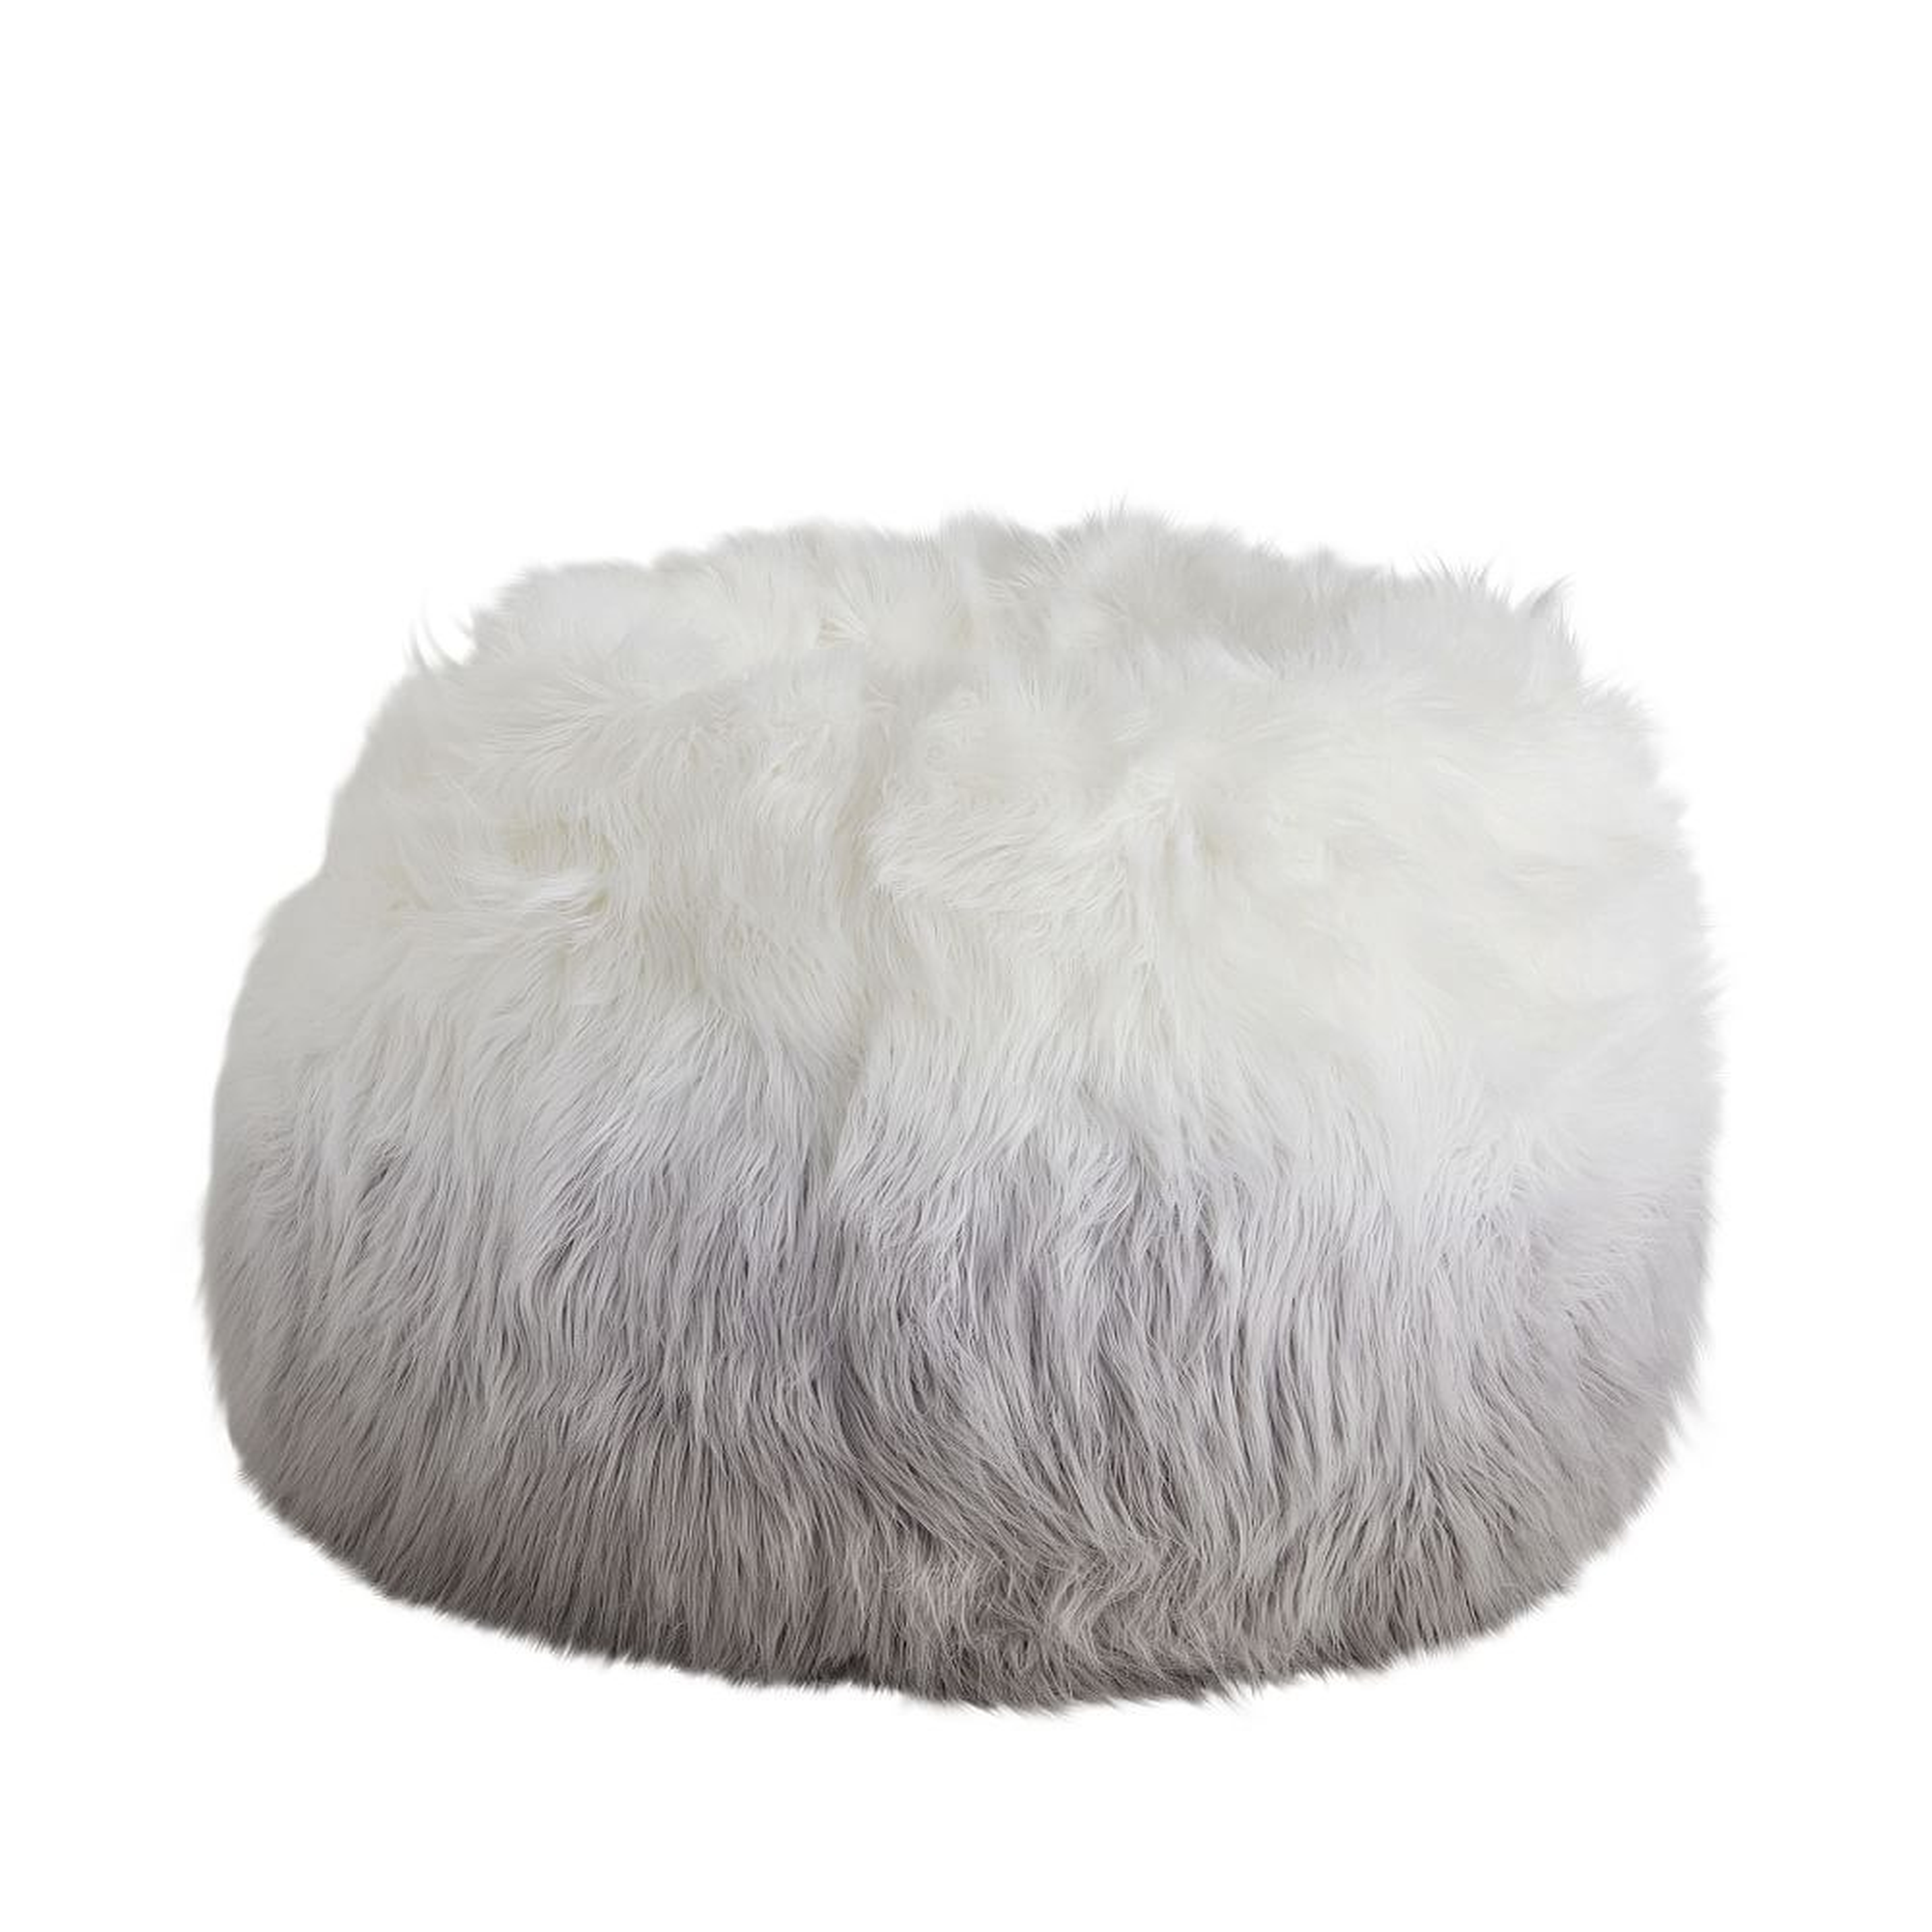 Himalayan Faux-Fur Charcoal Ombre Bean Bag Chair Slipcover + Insert, Large - Pottery Barn Teen